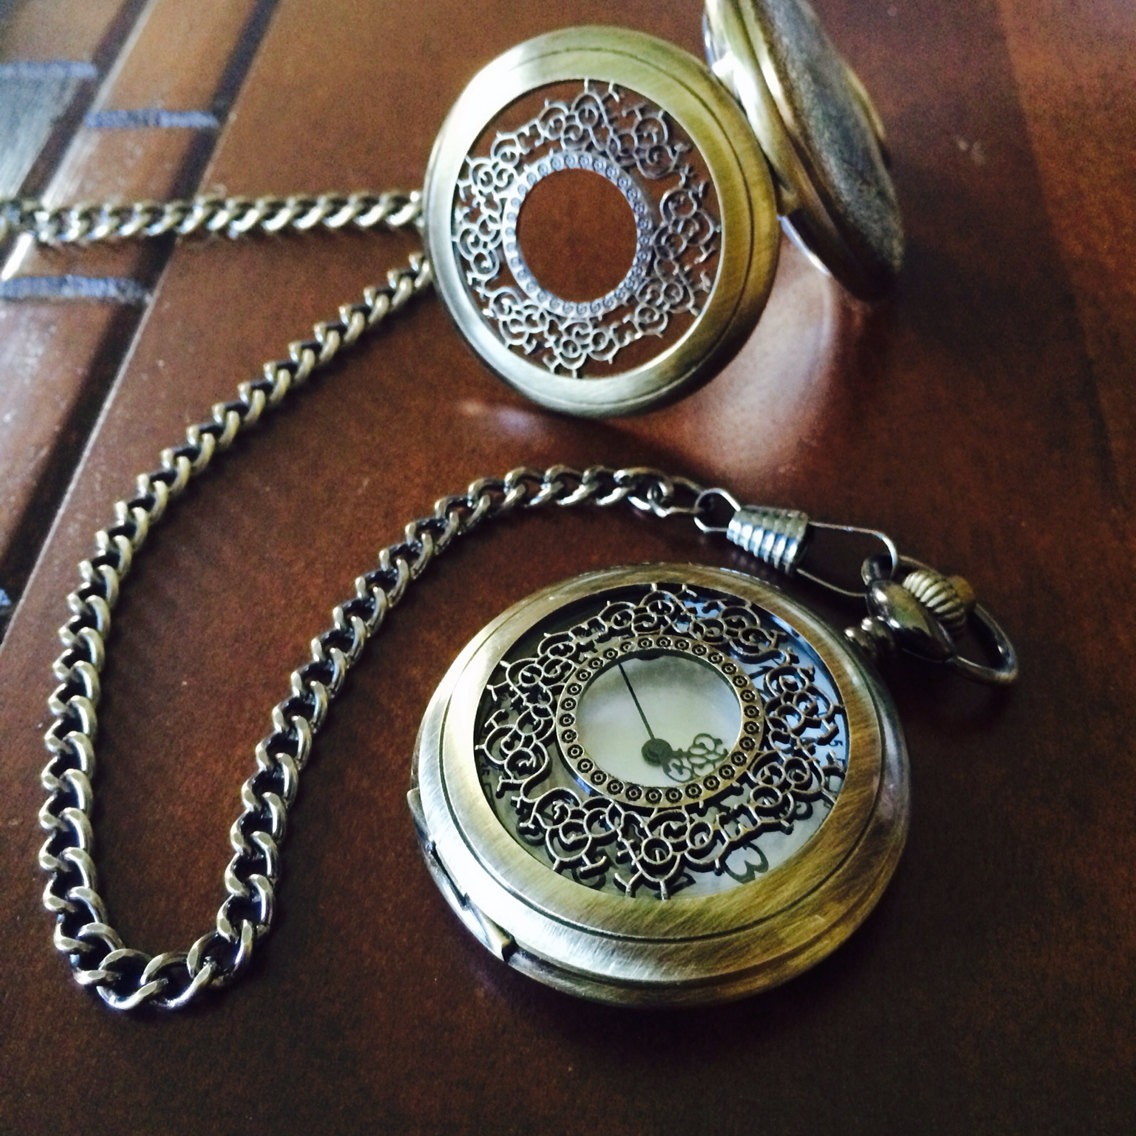 Set of 4 Steampunk Pocket Watch with chains Steampunk Best Groomsmen gifts Ships from Canada steampunk buy now online